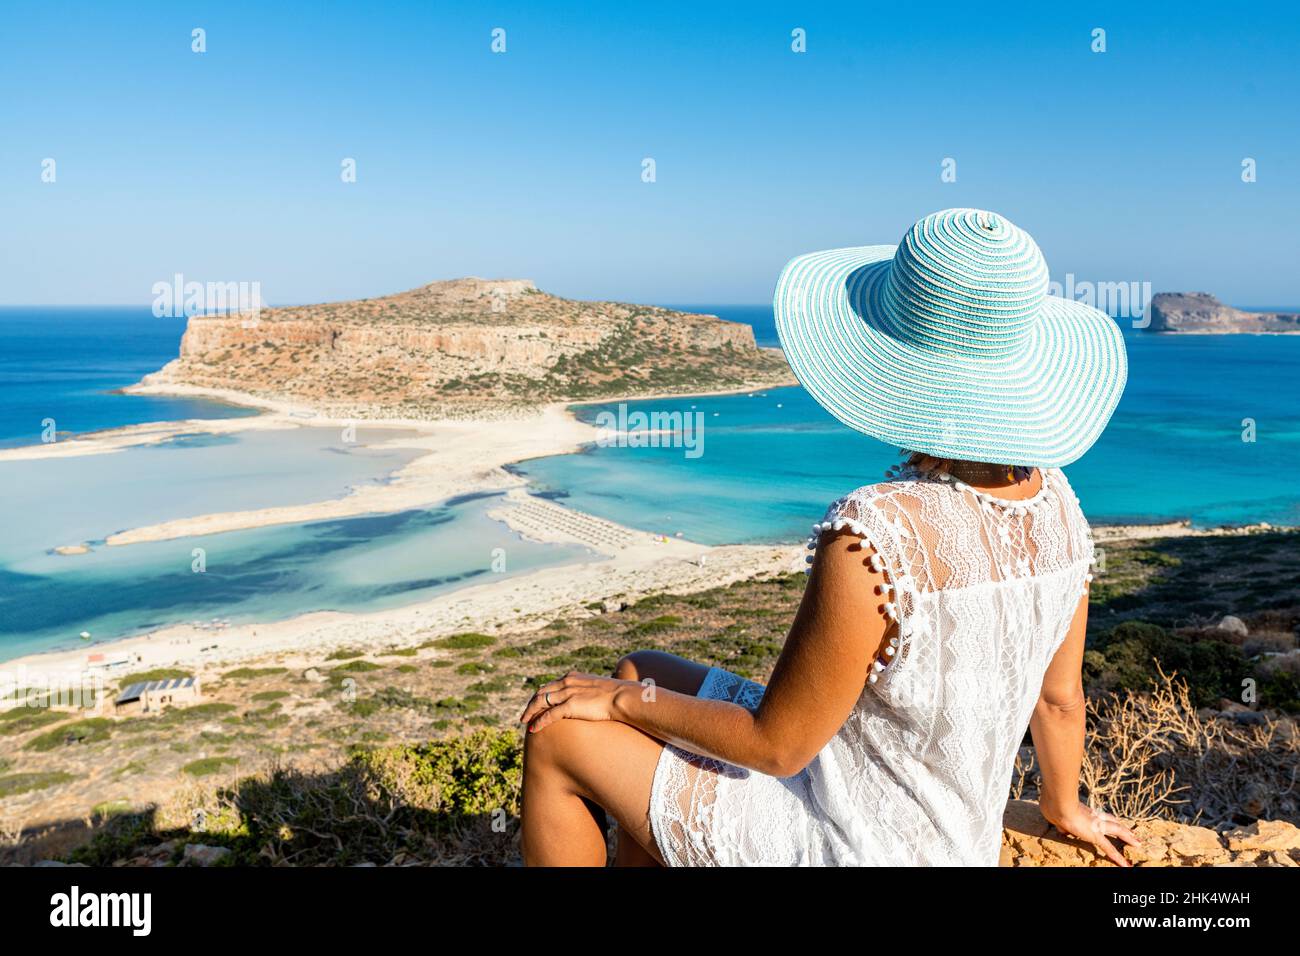 Portrait of woman with hat admiring the idyllic beach and lagoon sitting on top of hill, Balos, Crete, Greek Islands, Greece, Europe Stock Photo